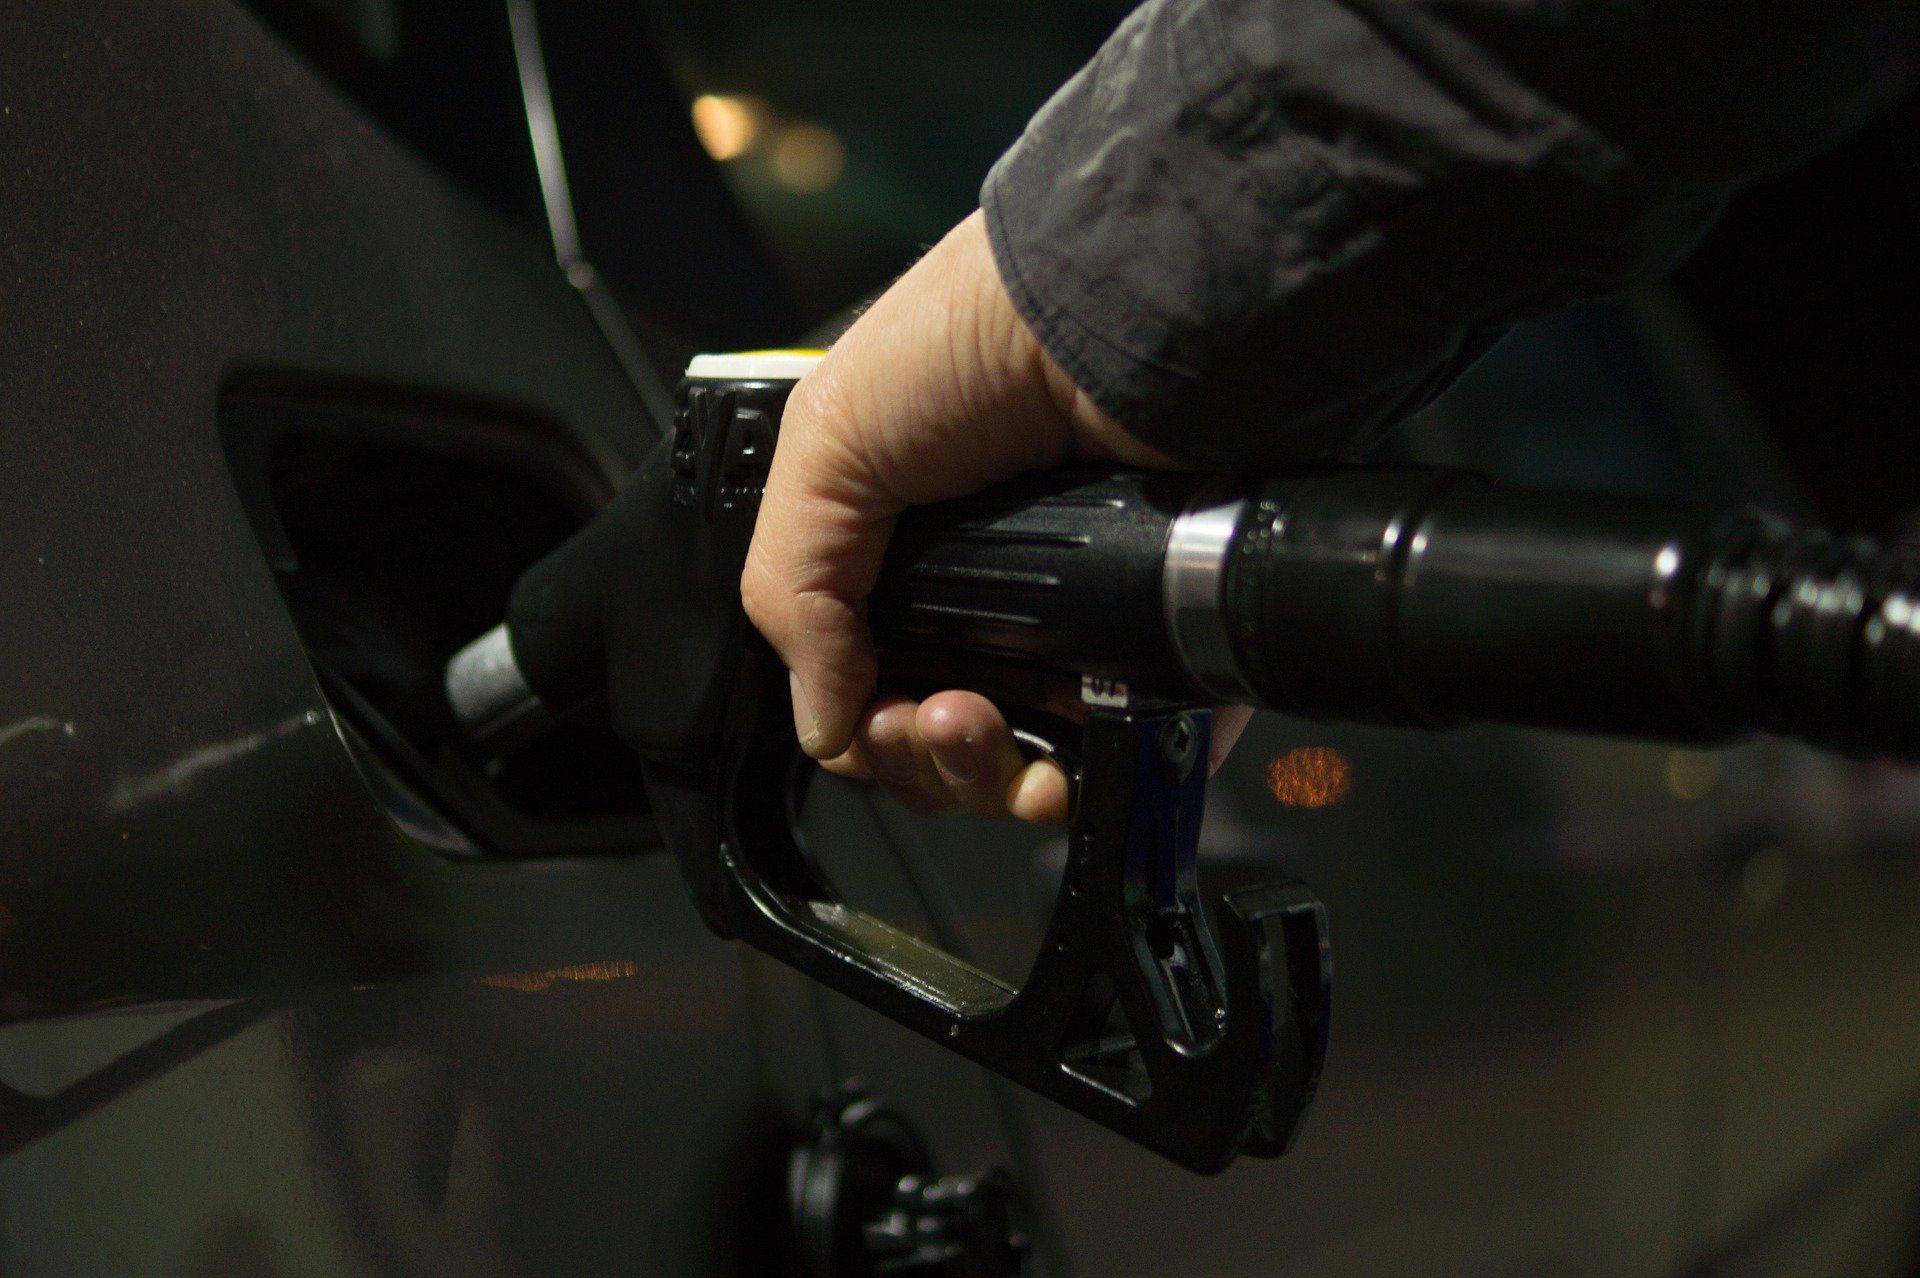 Fuel price today: Petrol and Diesel rates remain unchanged on April 11, 2022